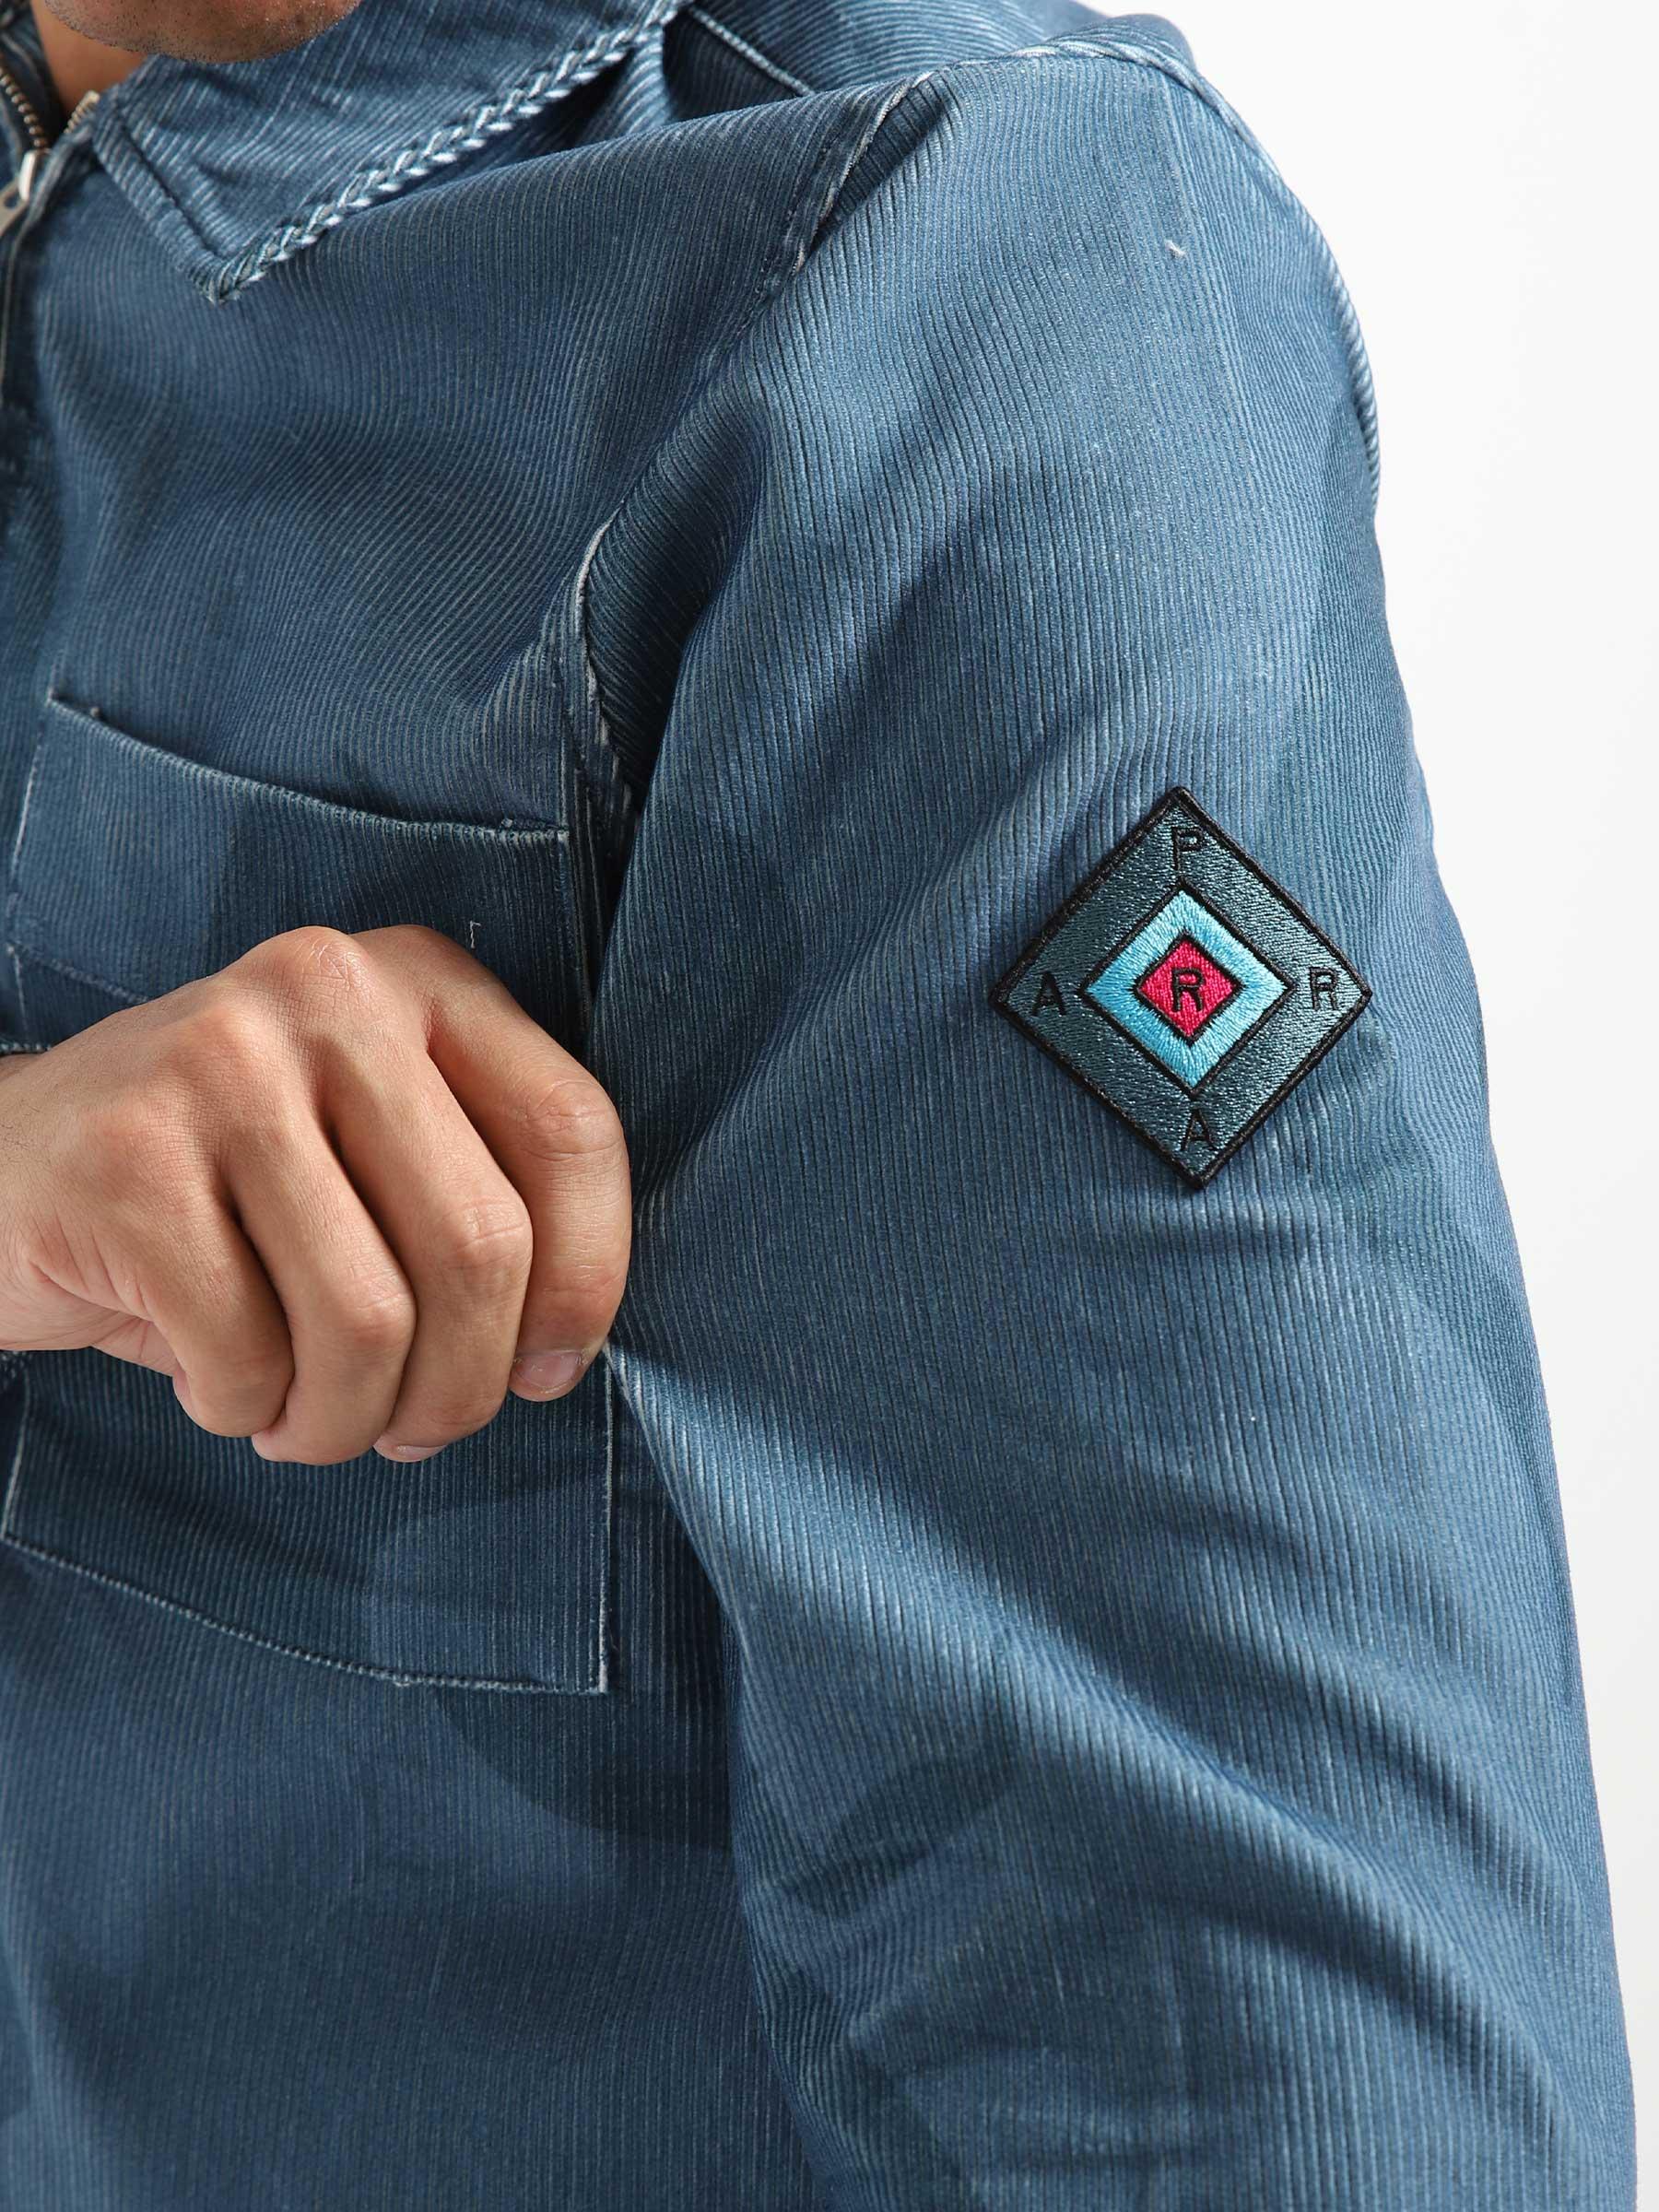 Army Dreamers Woven Shirt Jacket Blue Grey 49120